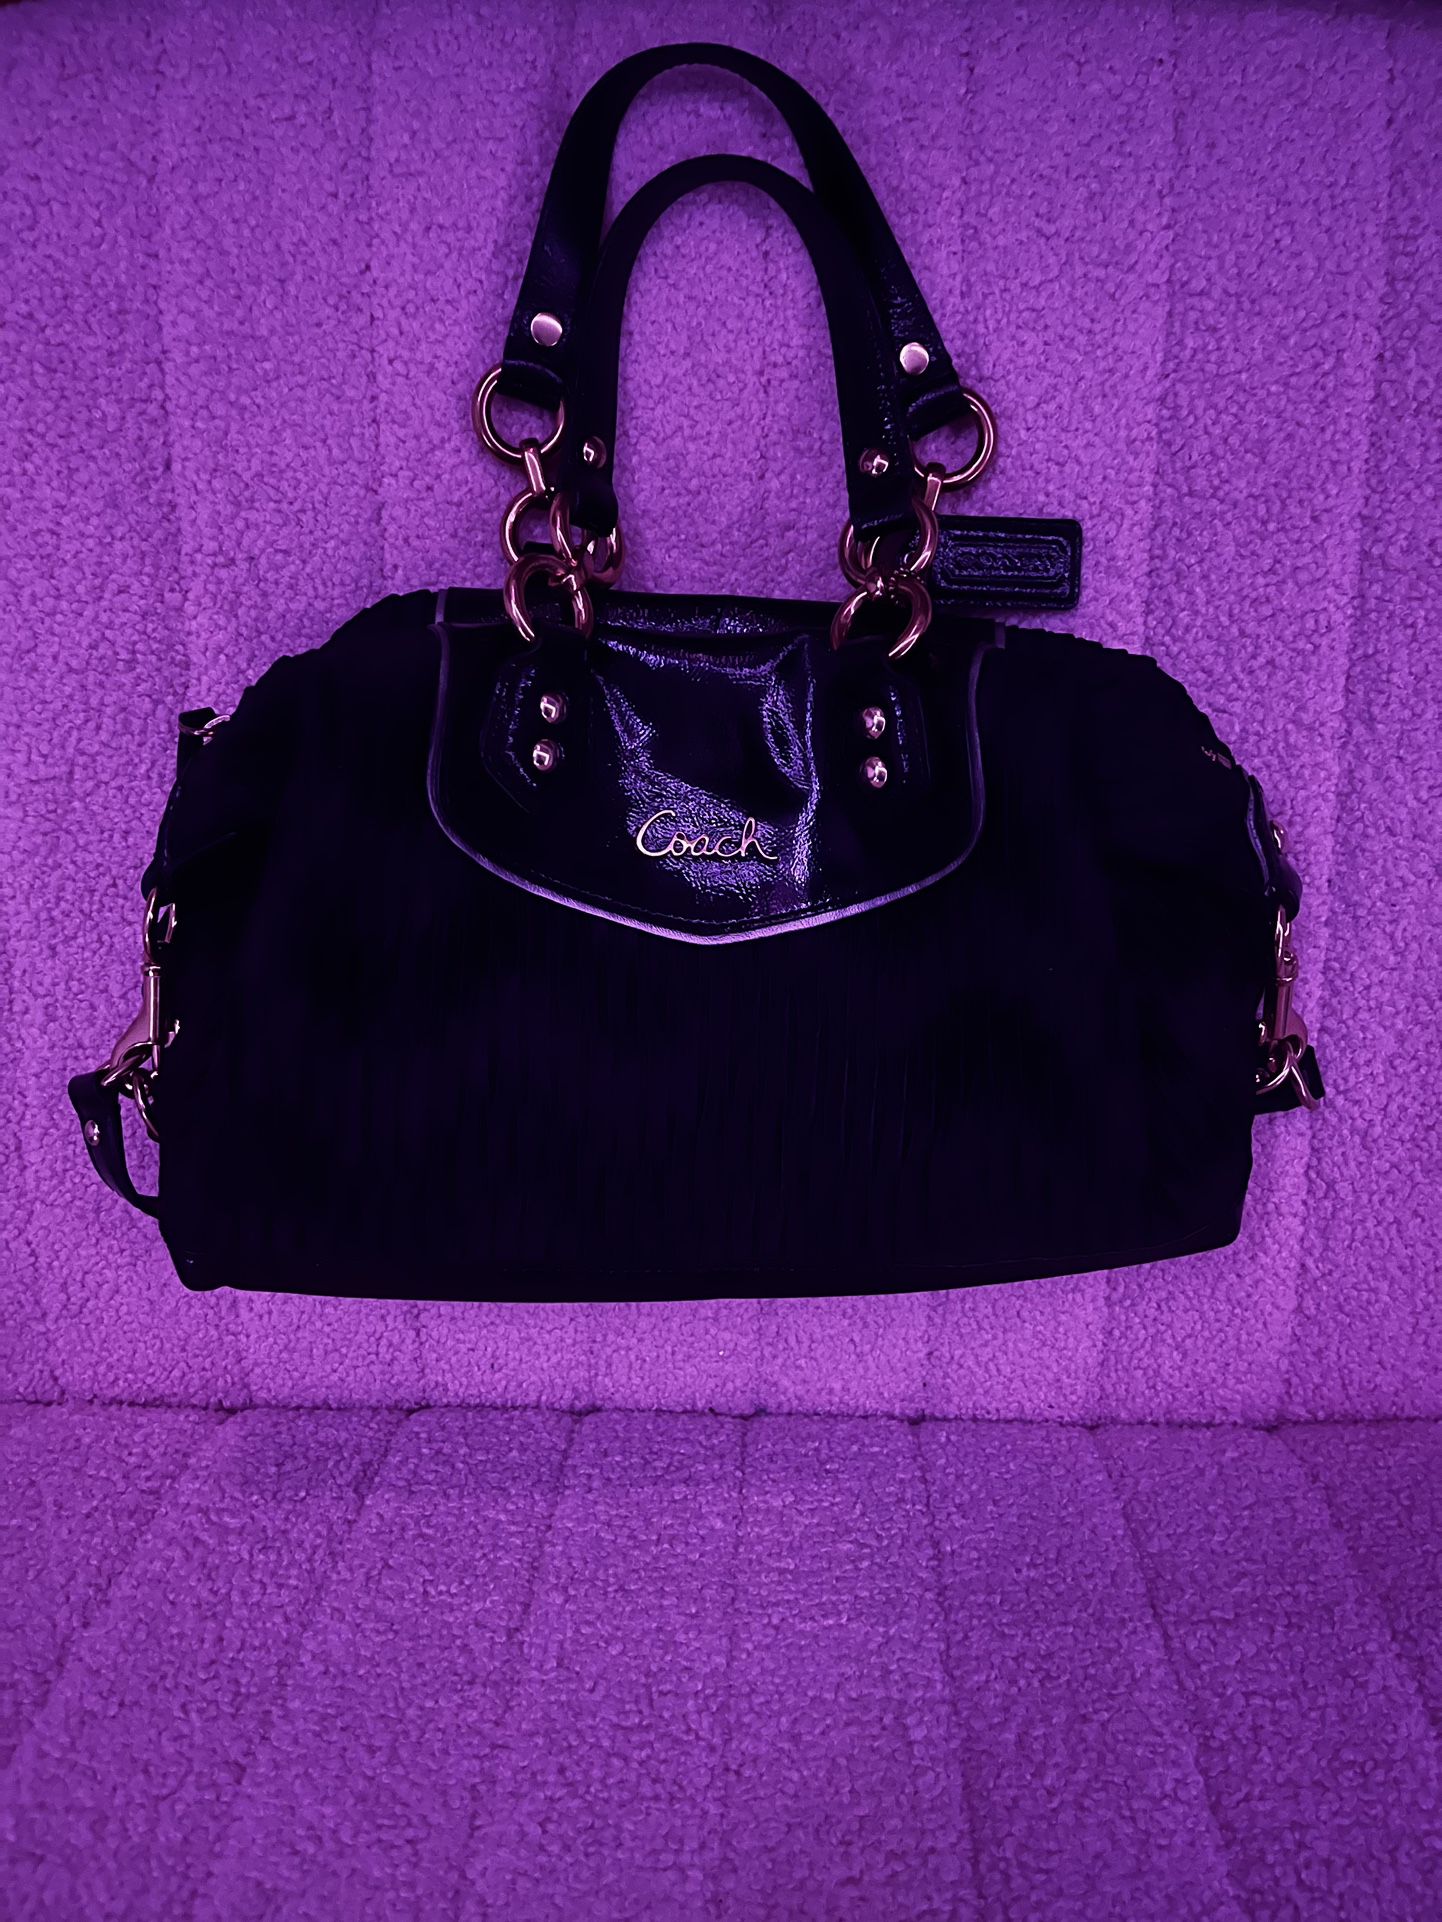 Coach Black Pleated Satin and Patent Leather Tote